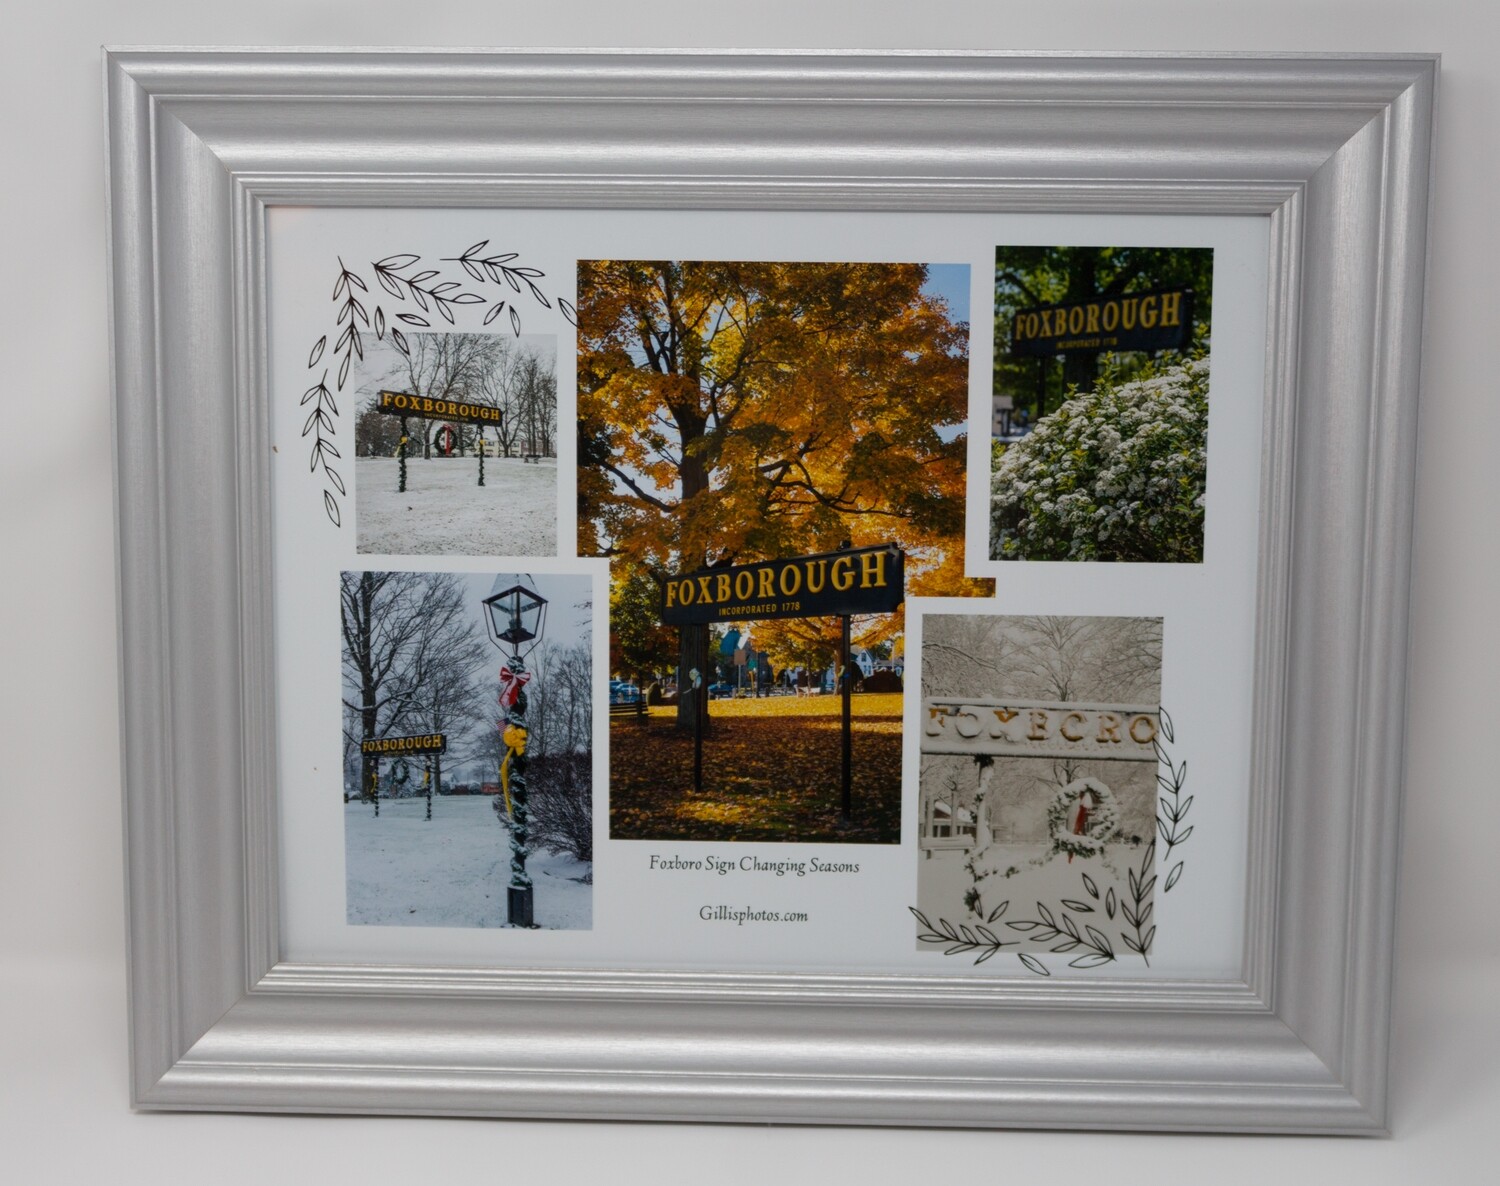 Foxboro Gallery-11"x 14" Framed Photo Collage of the Foxboro Sign In Revolving Seasons